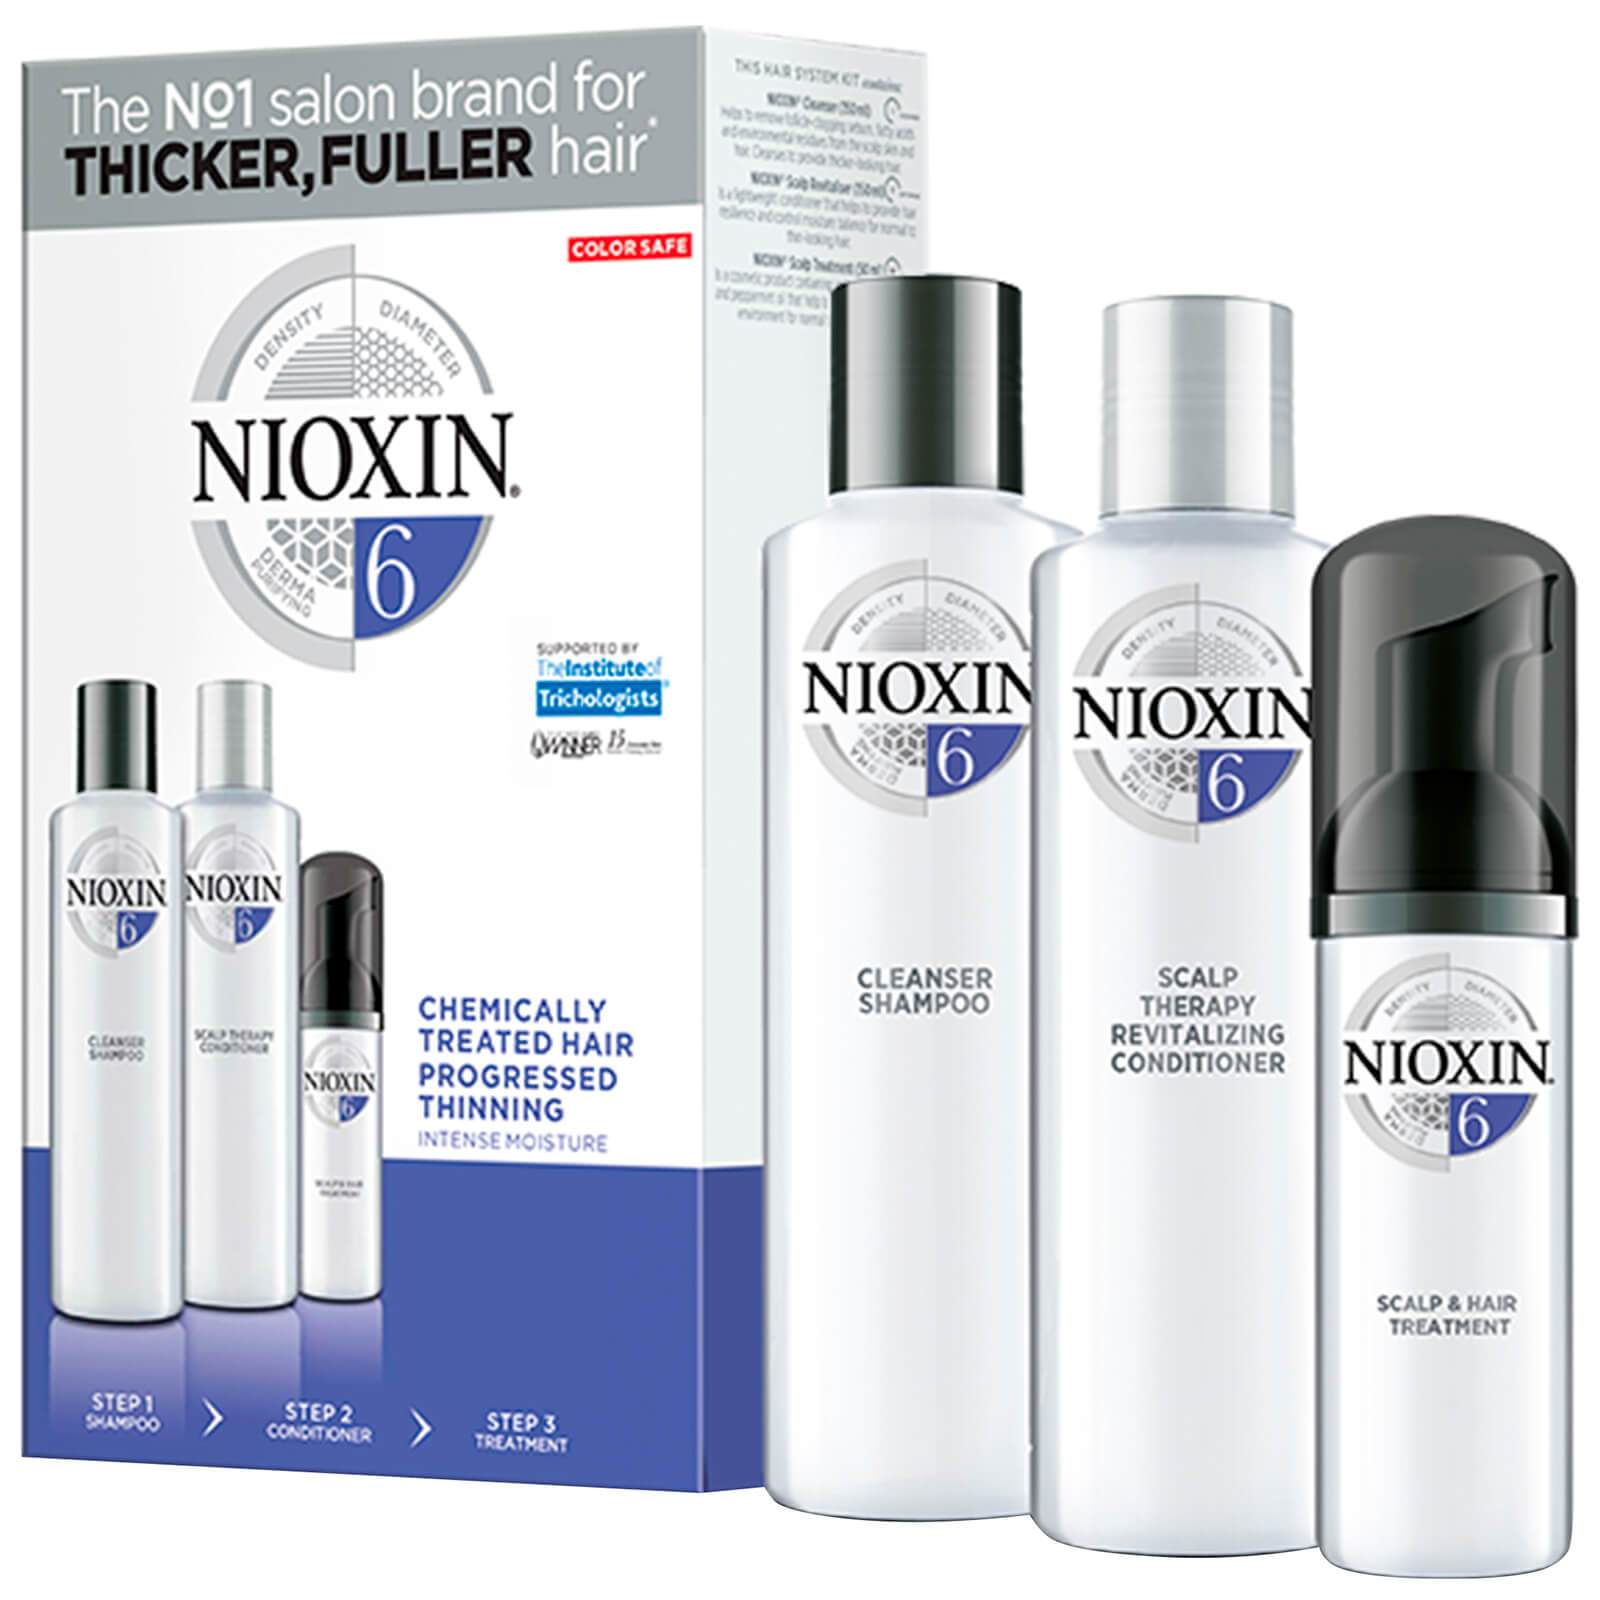 Nioxin Nr.6 Cemically Treated Hair Progressed Thinning 300ml